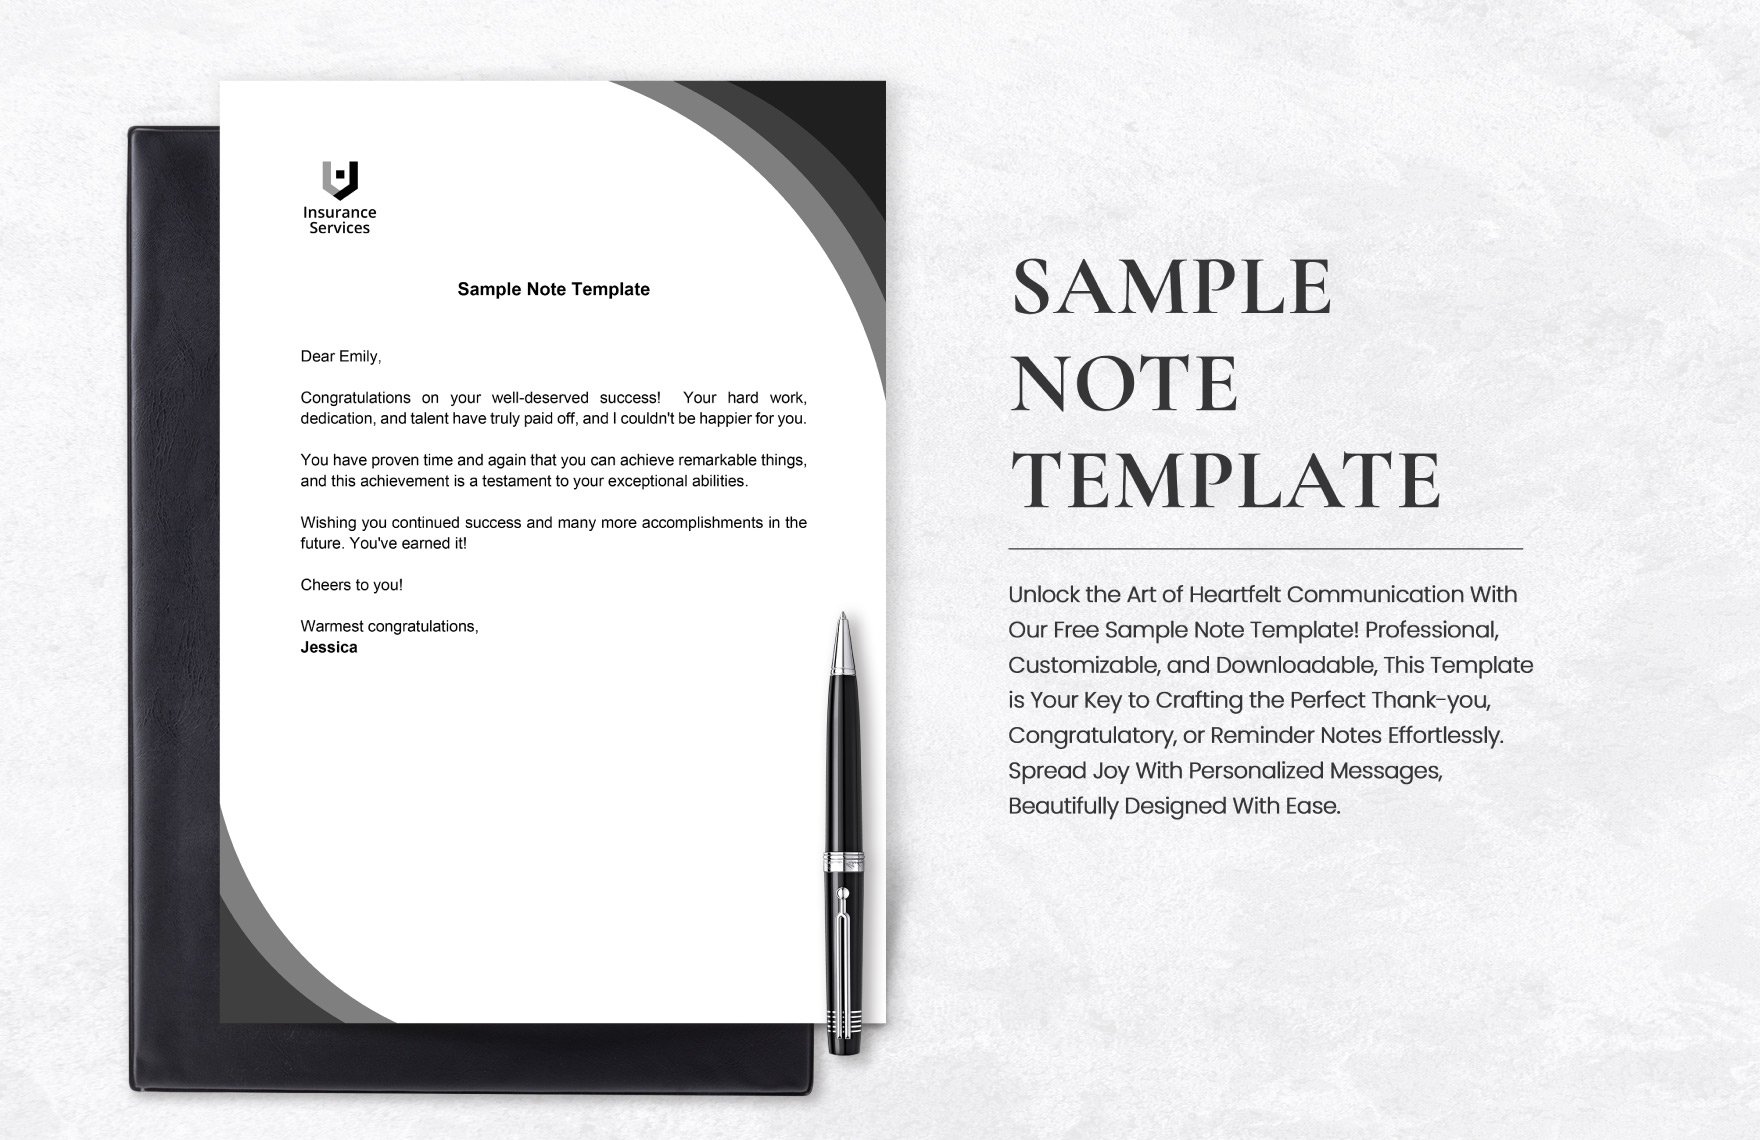 Sample Note Template